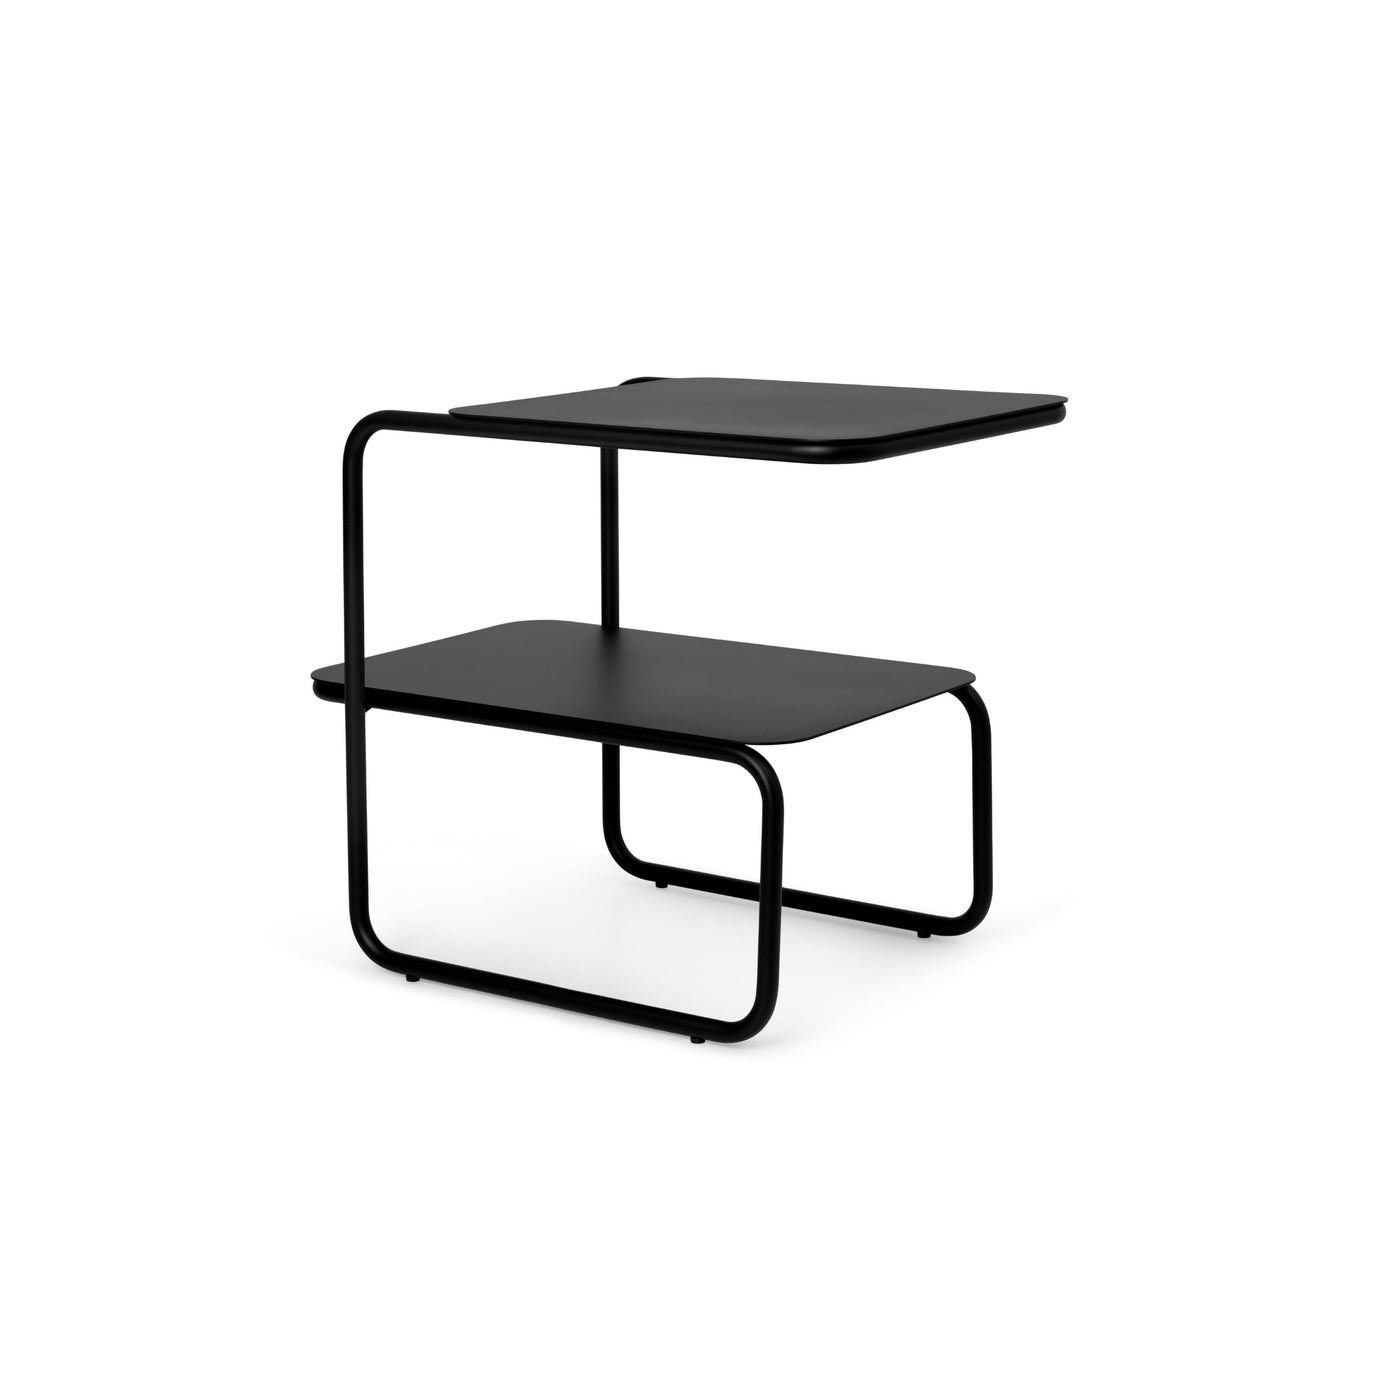 Ferm Living Level side table for indoor & outdoor use. Shop online at someday designs. #colour_black